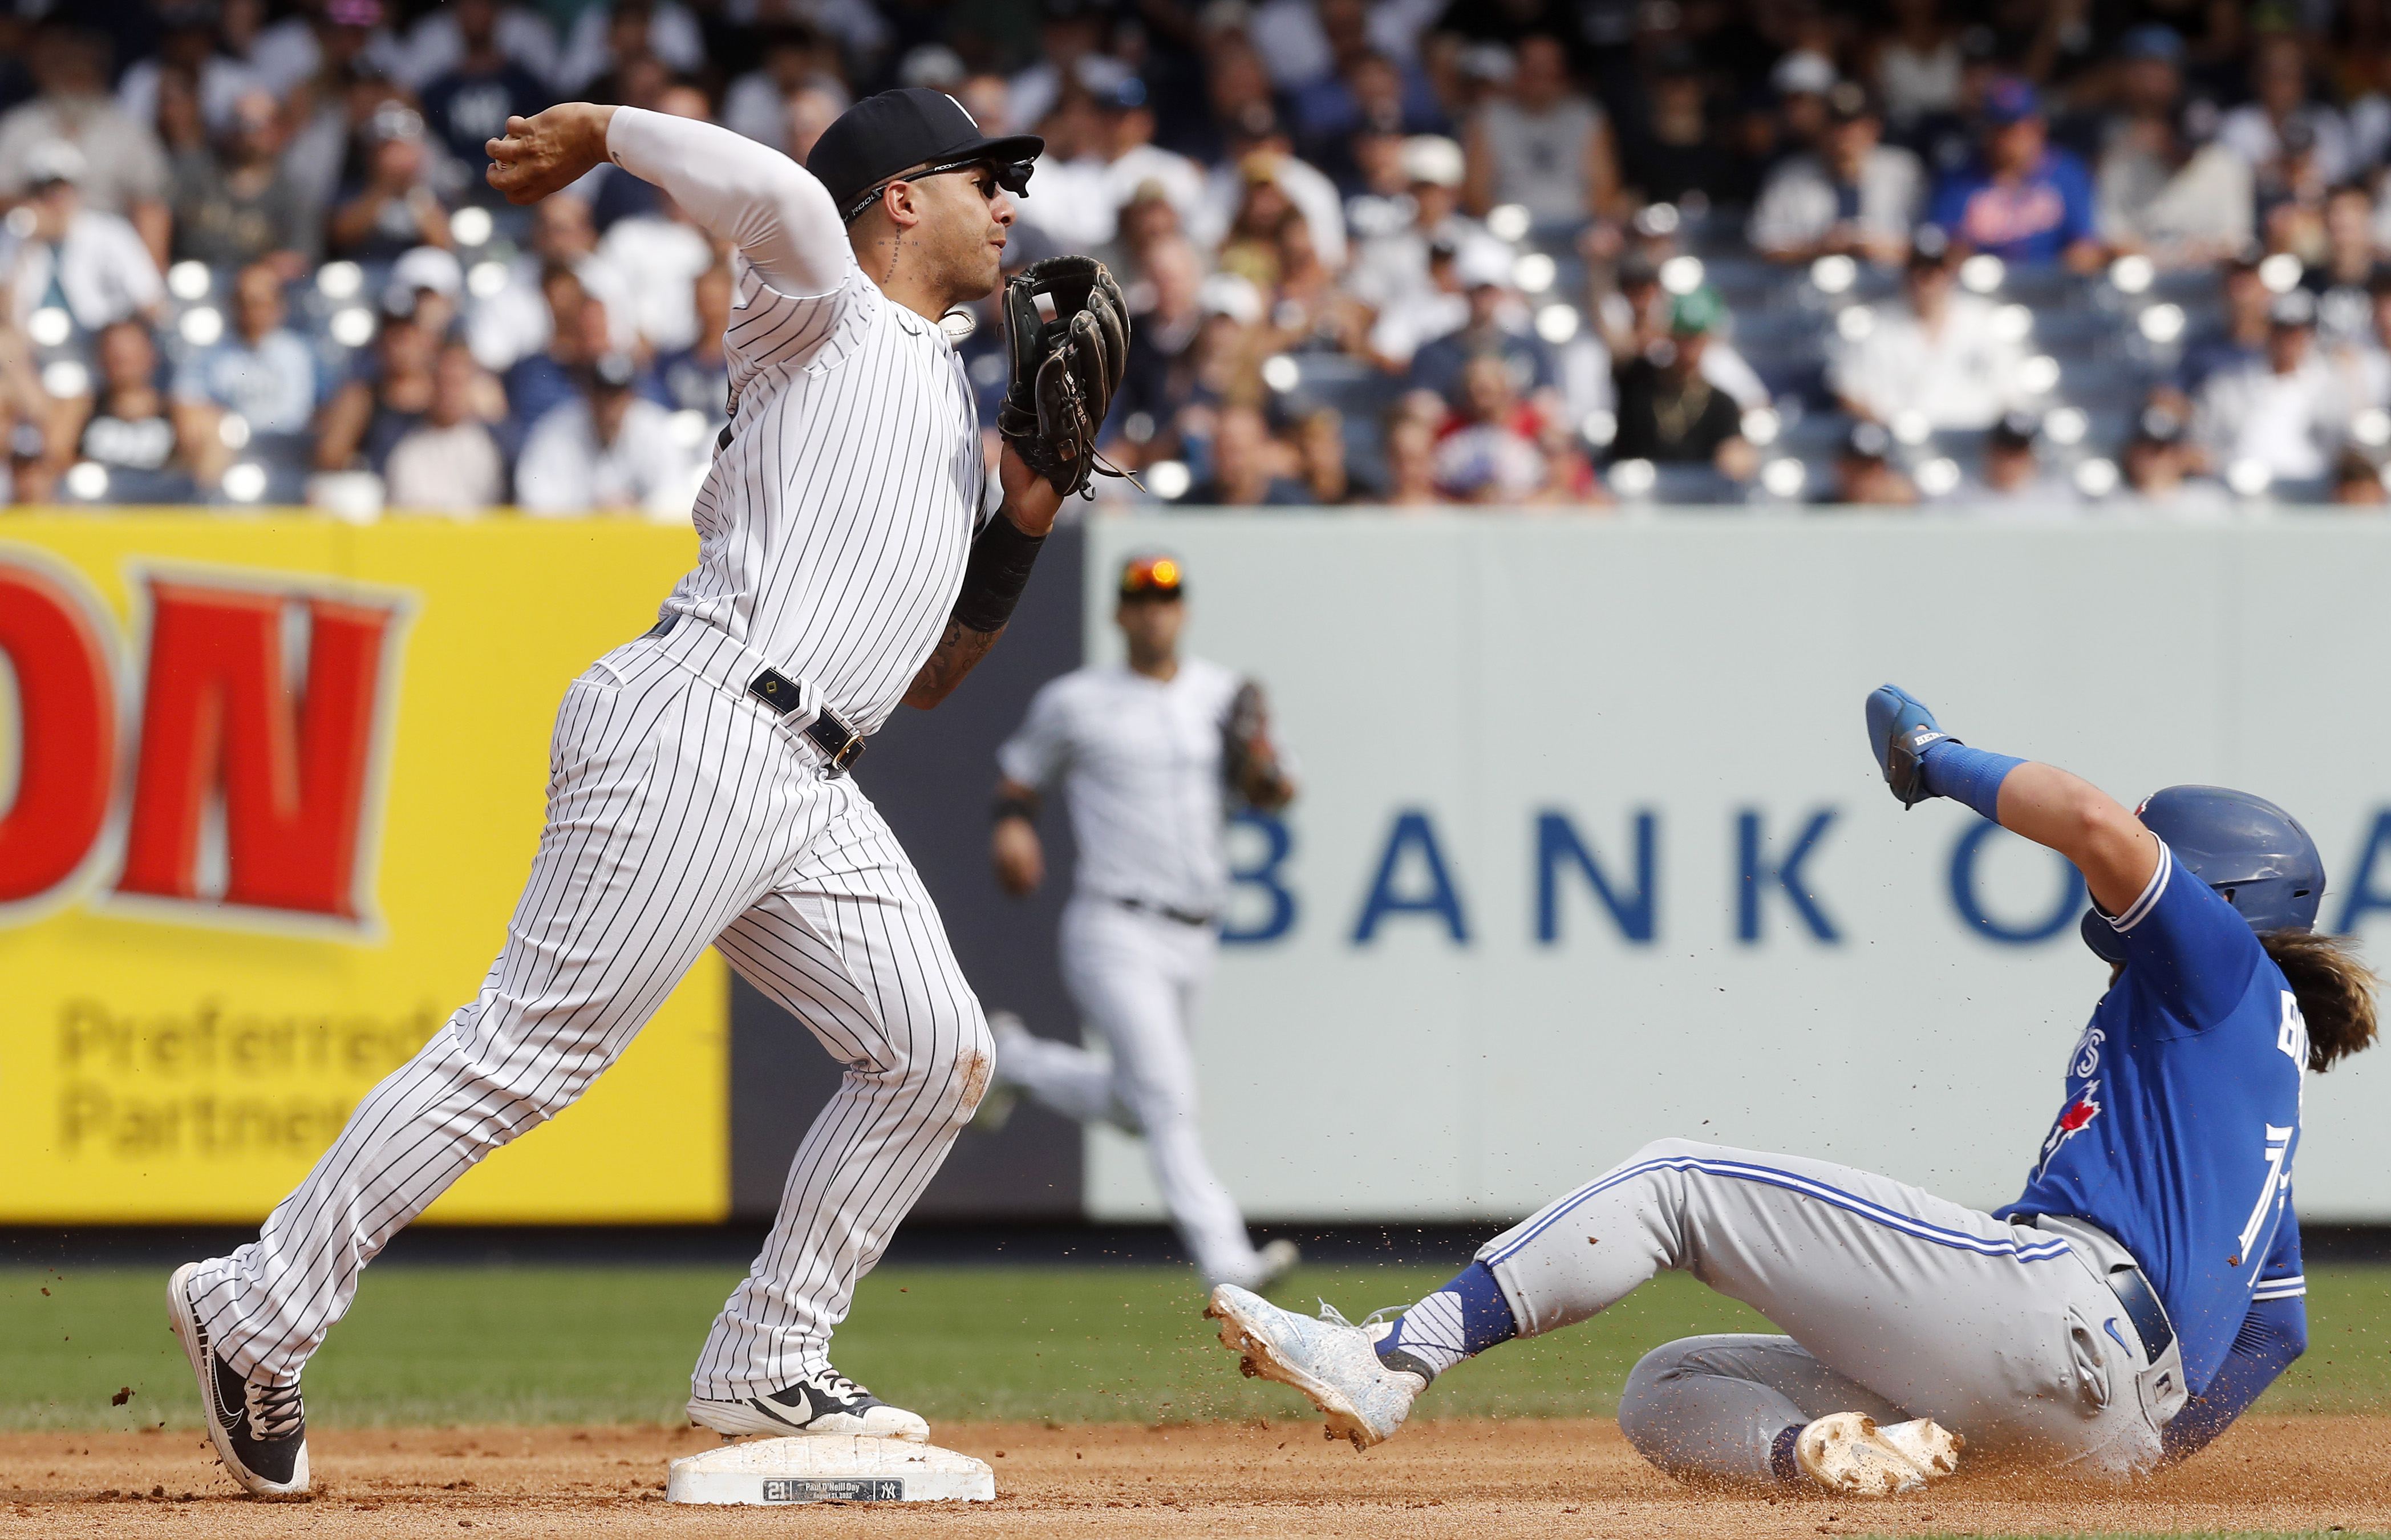 Boone's Yankees Job On The Line Due To Cashman's Missteps